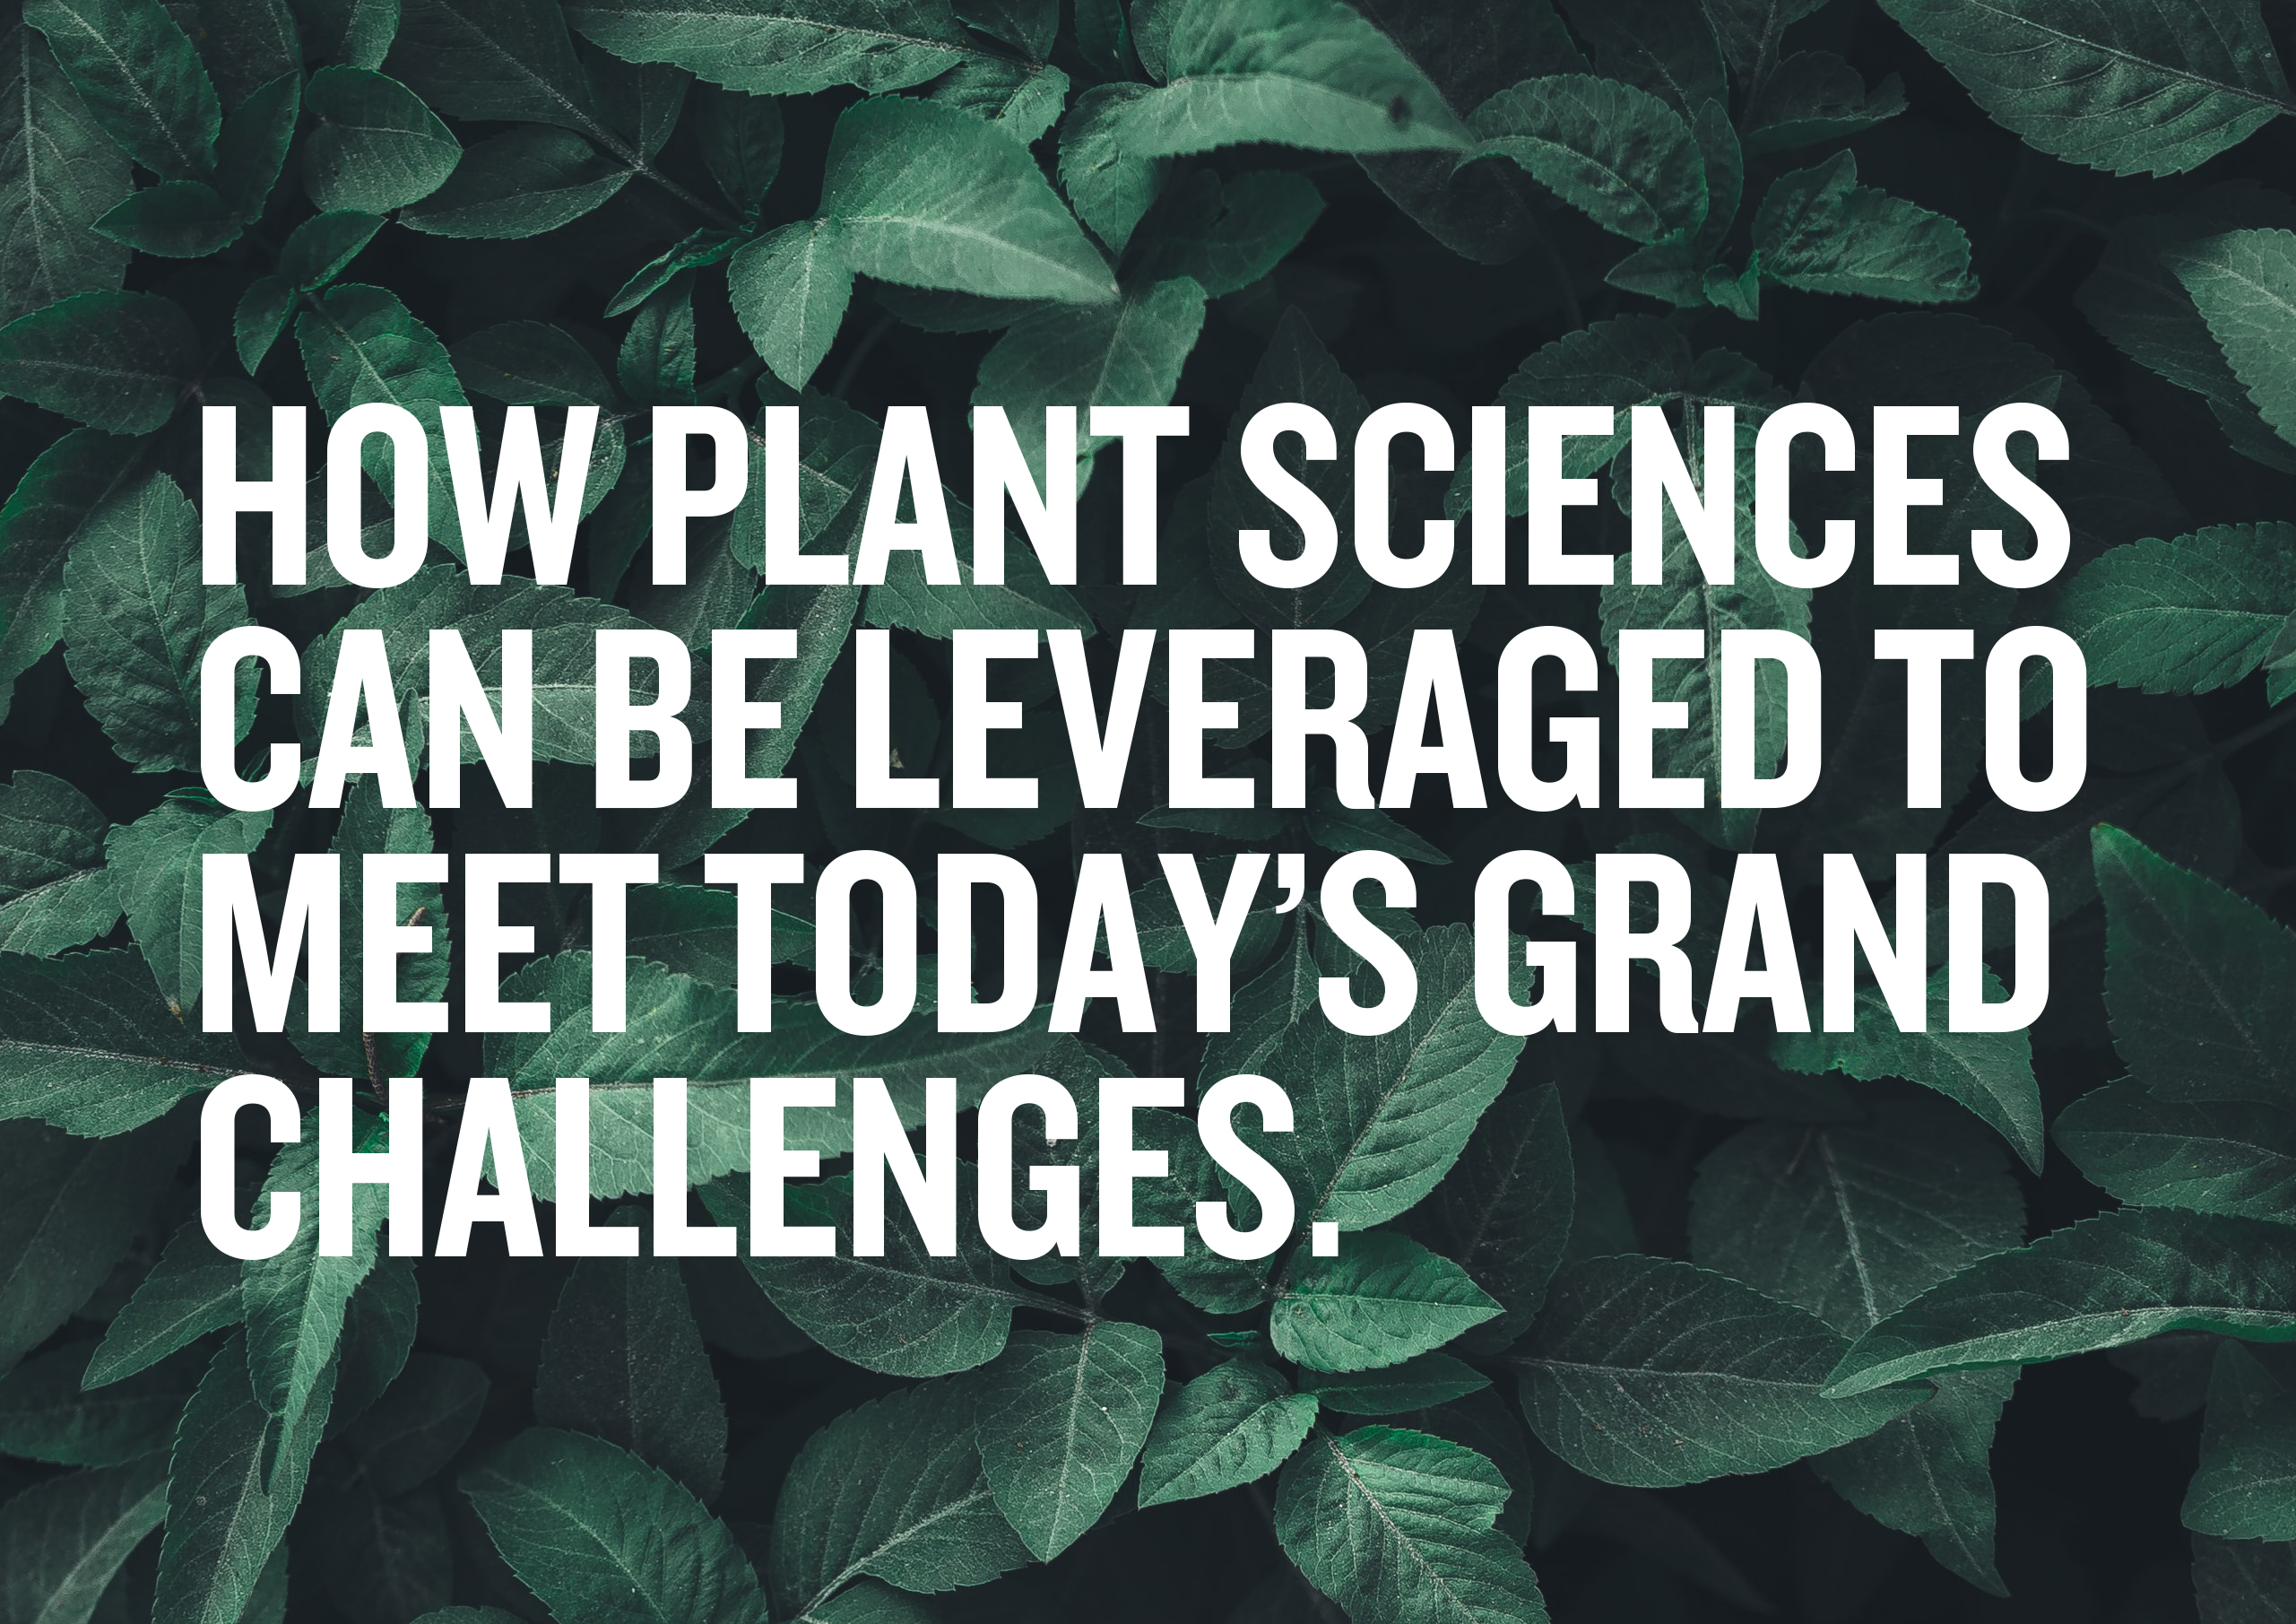  How plant sciences can be leveraged to meet today’s Grand Challenges.